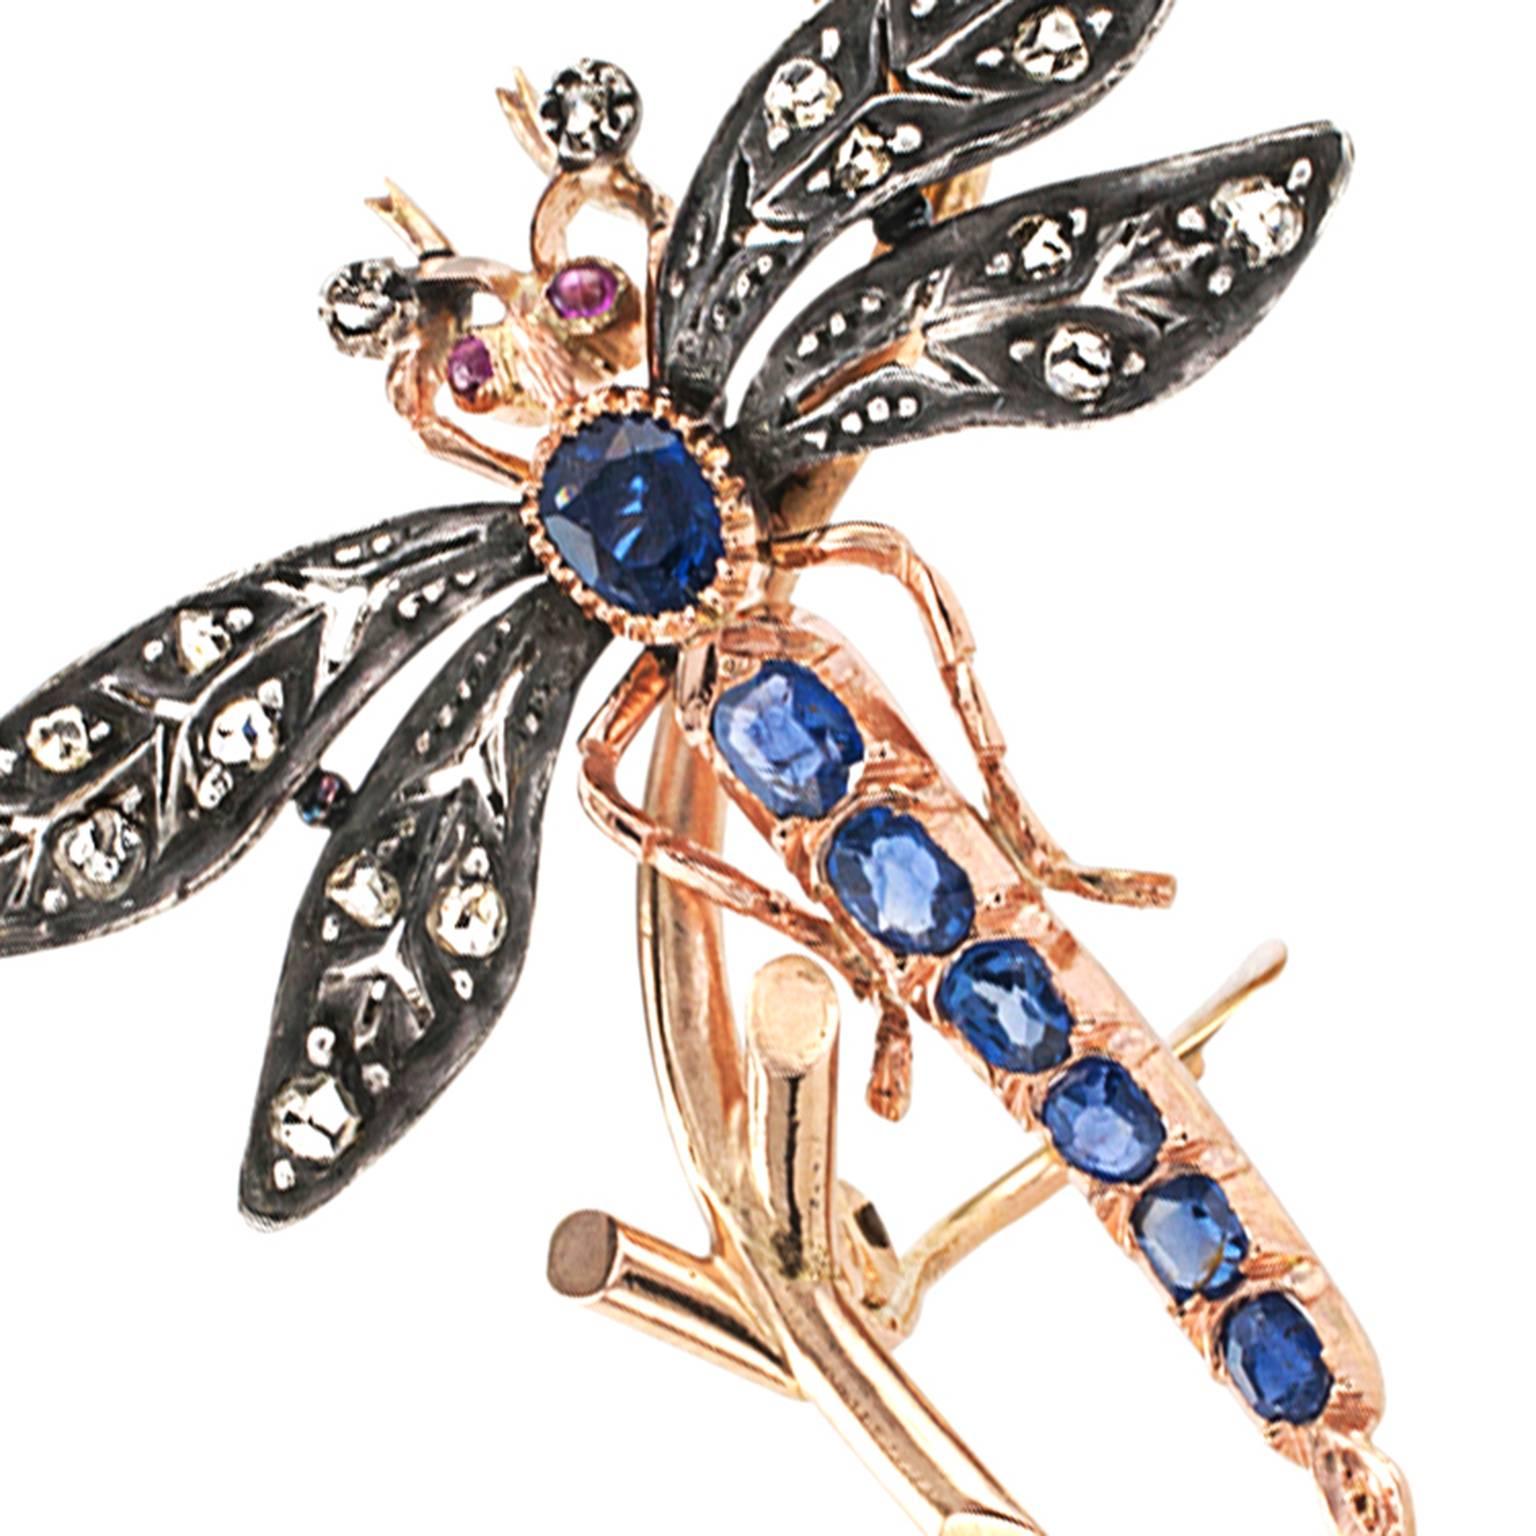 Victorian Dragonfly Brooch with Diamonds Rubies and Sapphires

Graceful and delicate as only a dragonfly can be, full of detail that lends an aura of realism. Perched upon a curvaceous twig, the wings designed in such a way that they appear to be